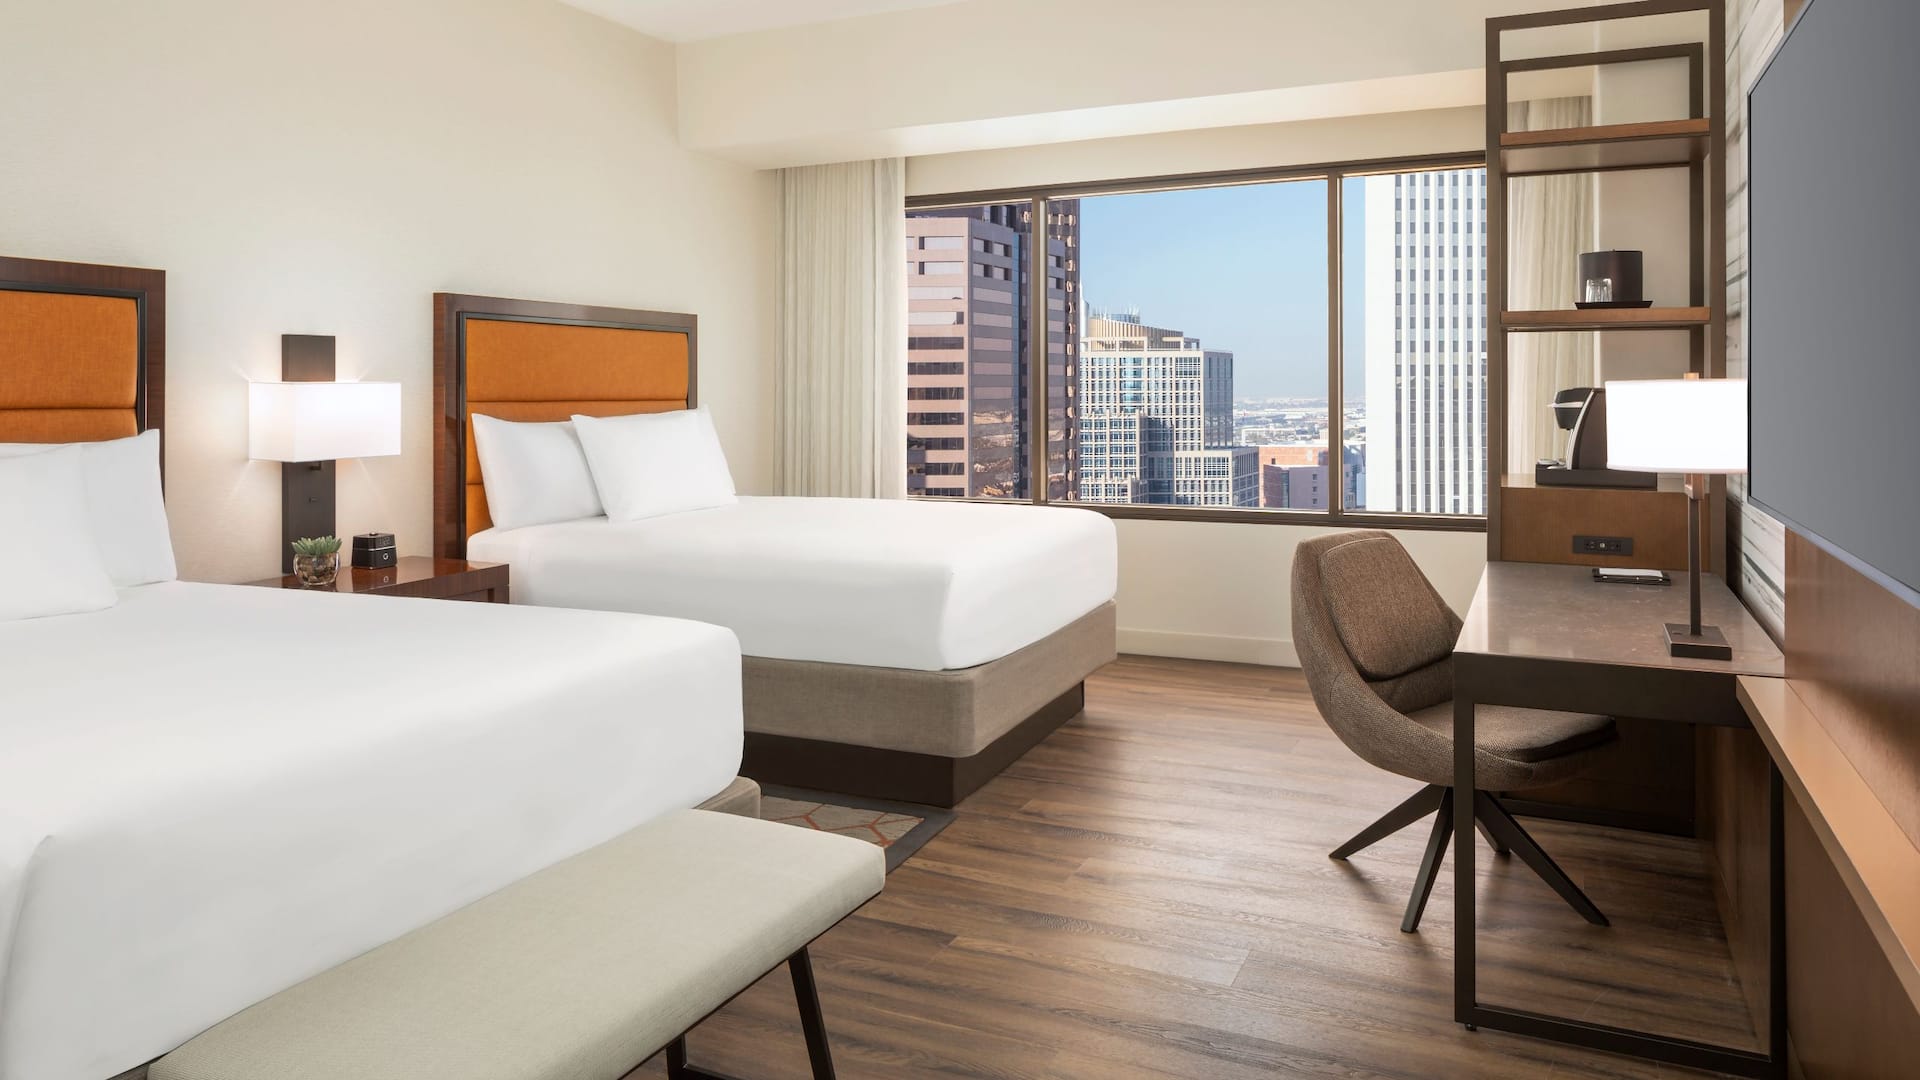 A two bed hotel room with a view of downtown Phoenix